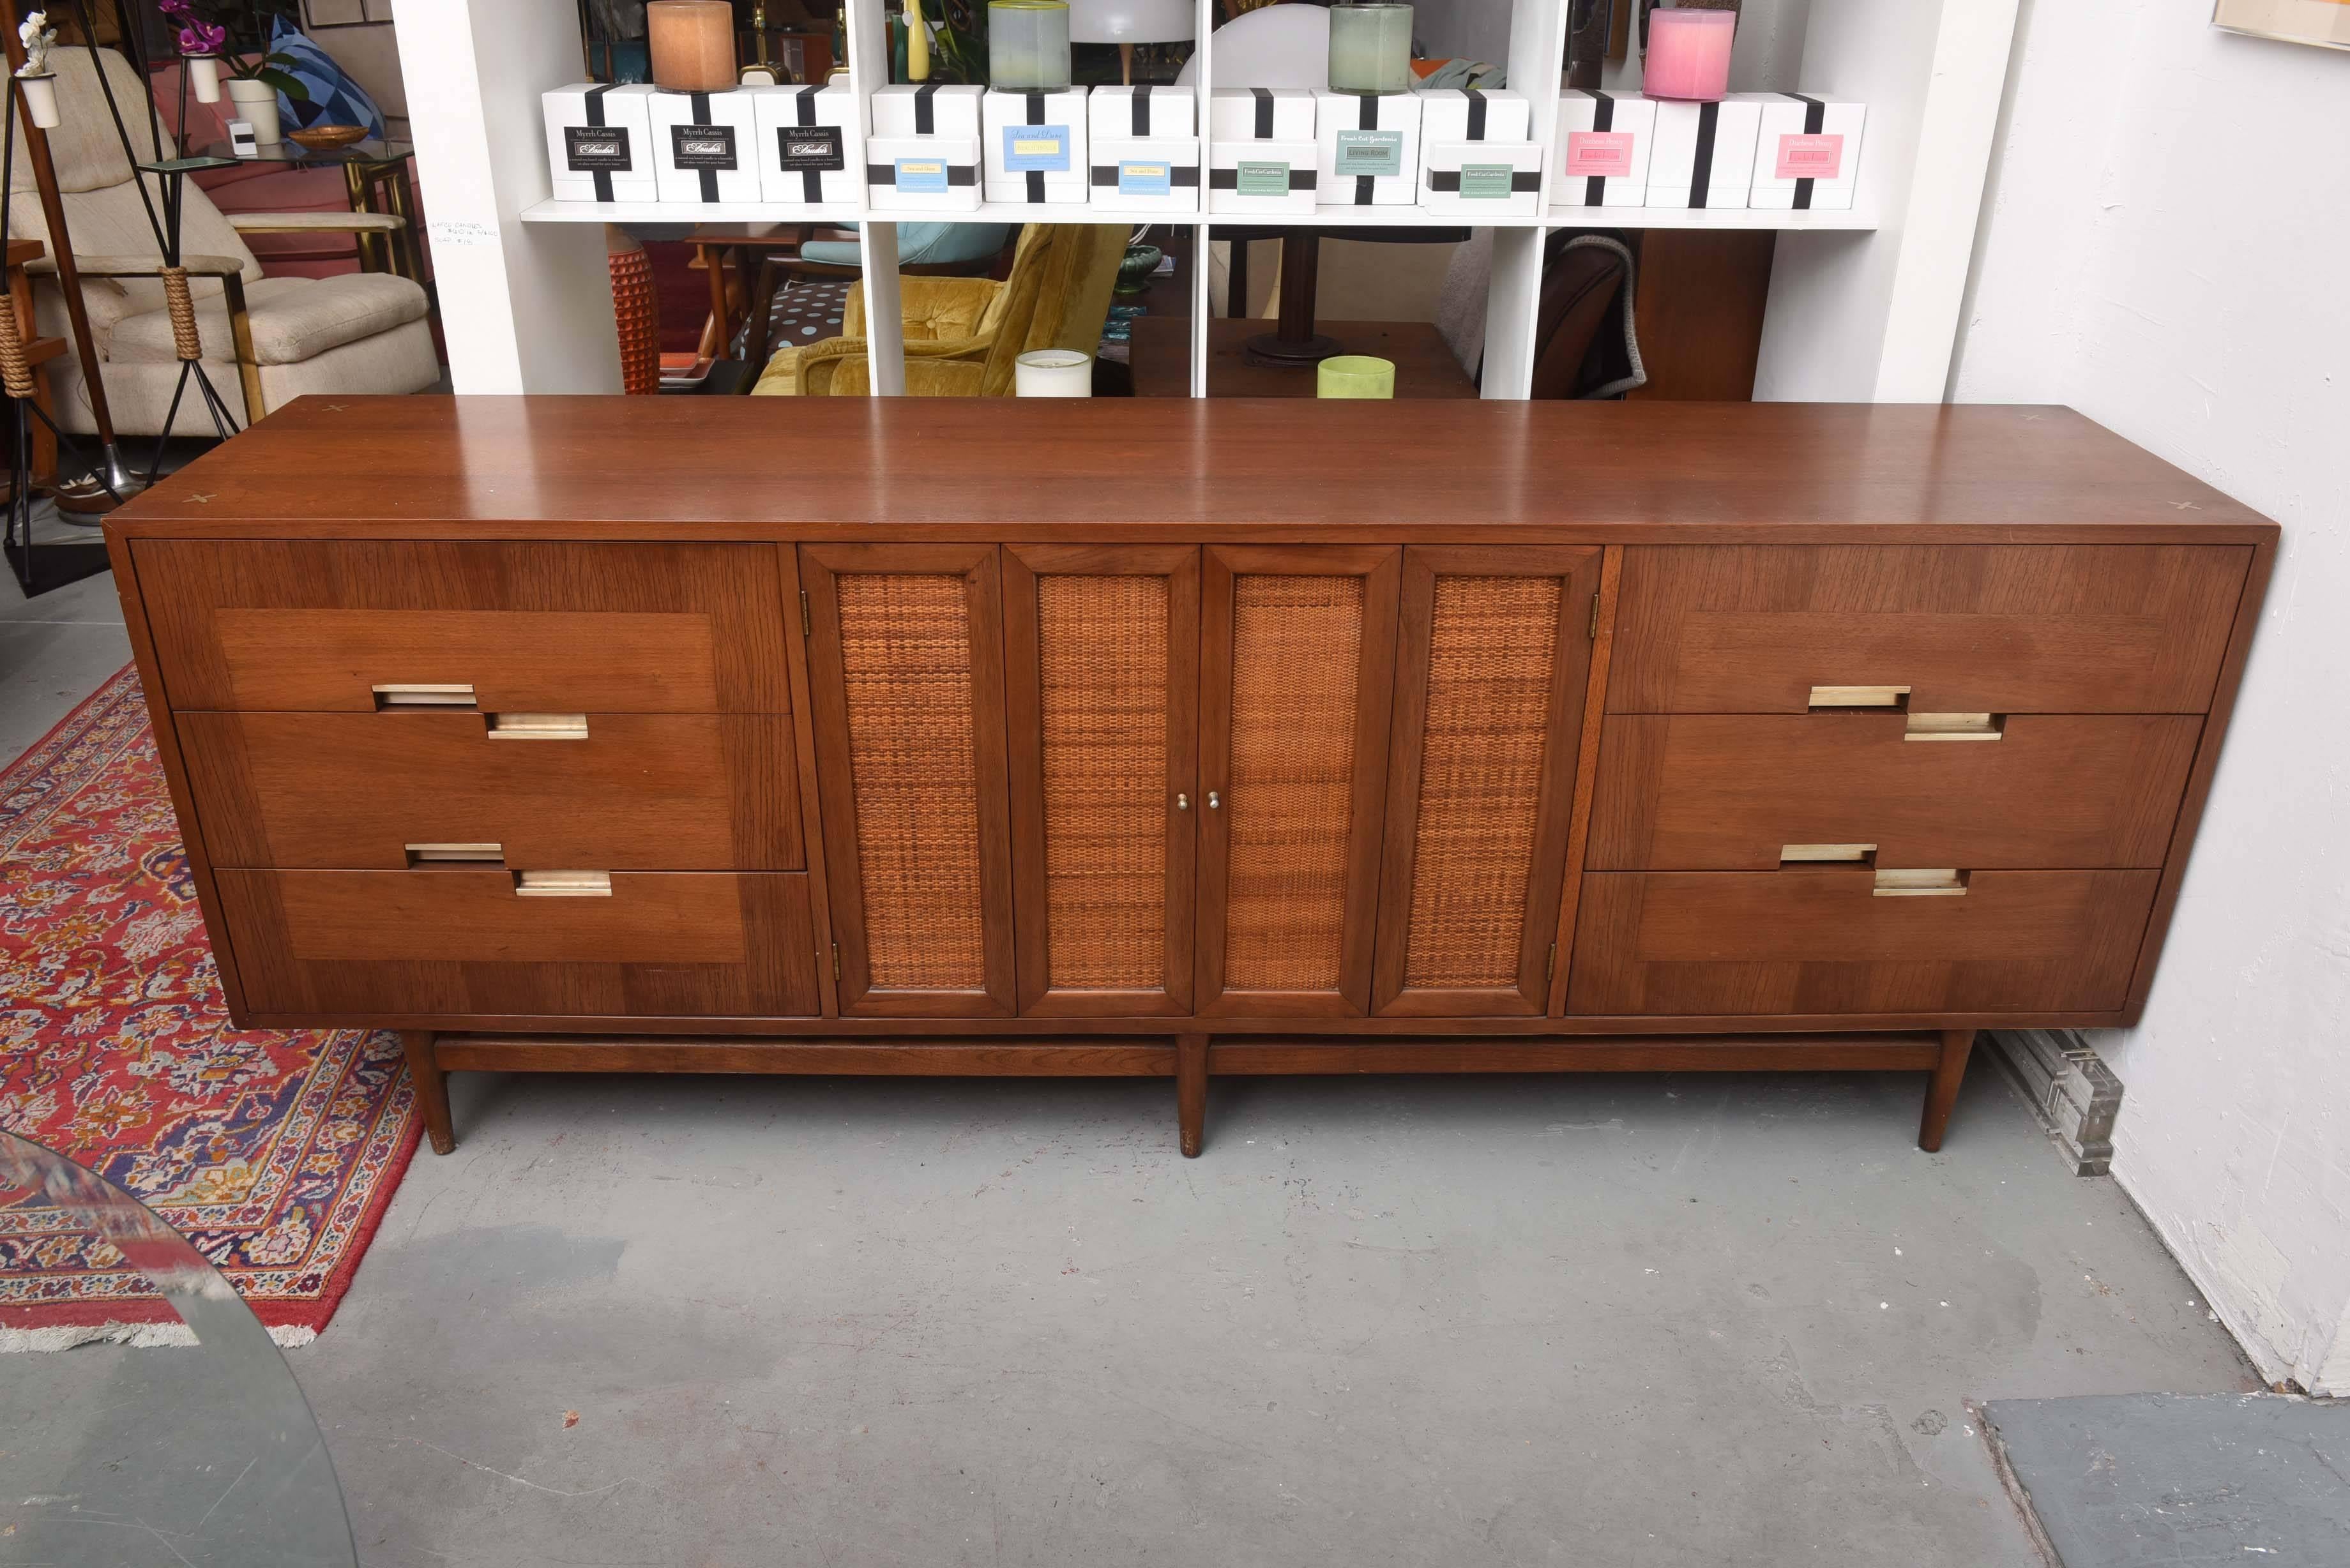 Gorgeous monumental Martinsville credenza with brass accents and canned doors, USA, 1960s.